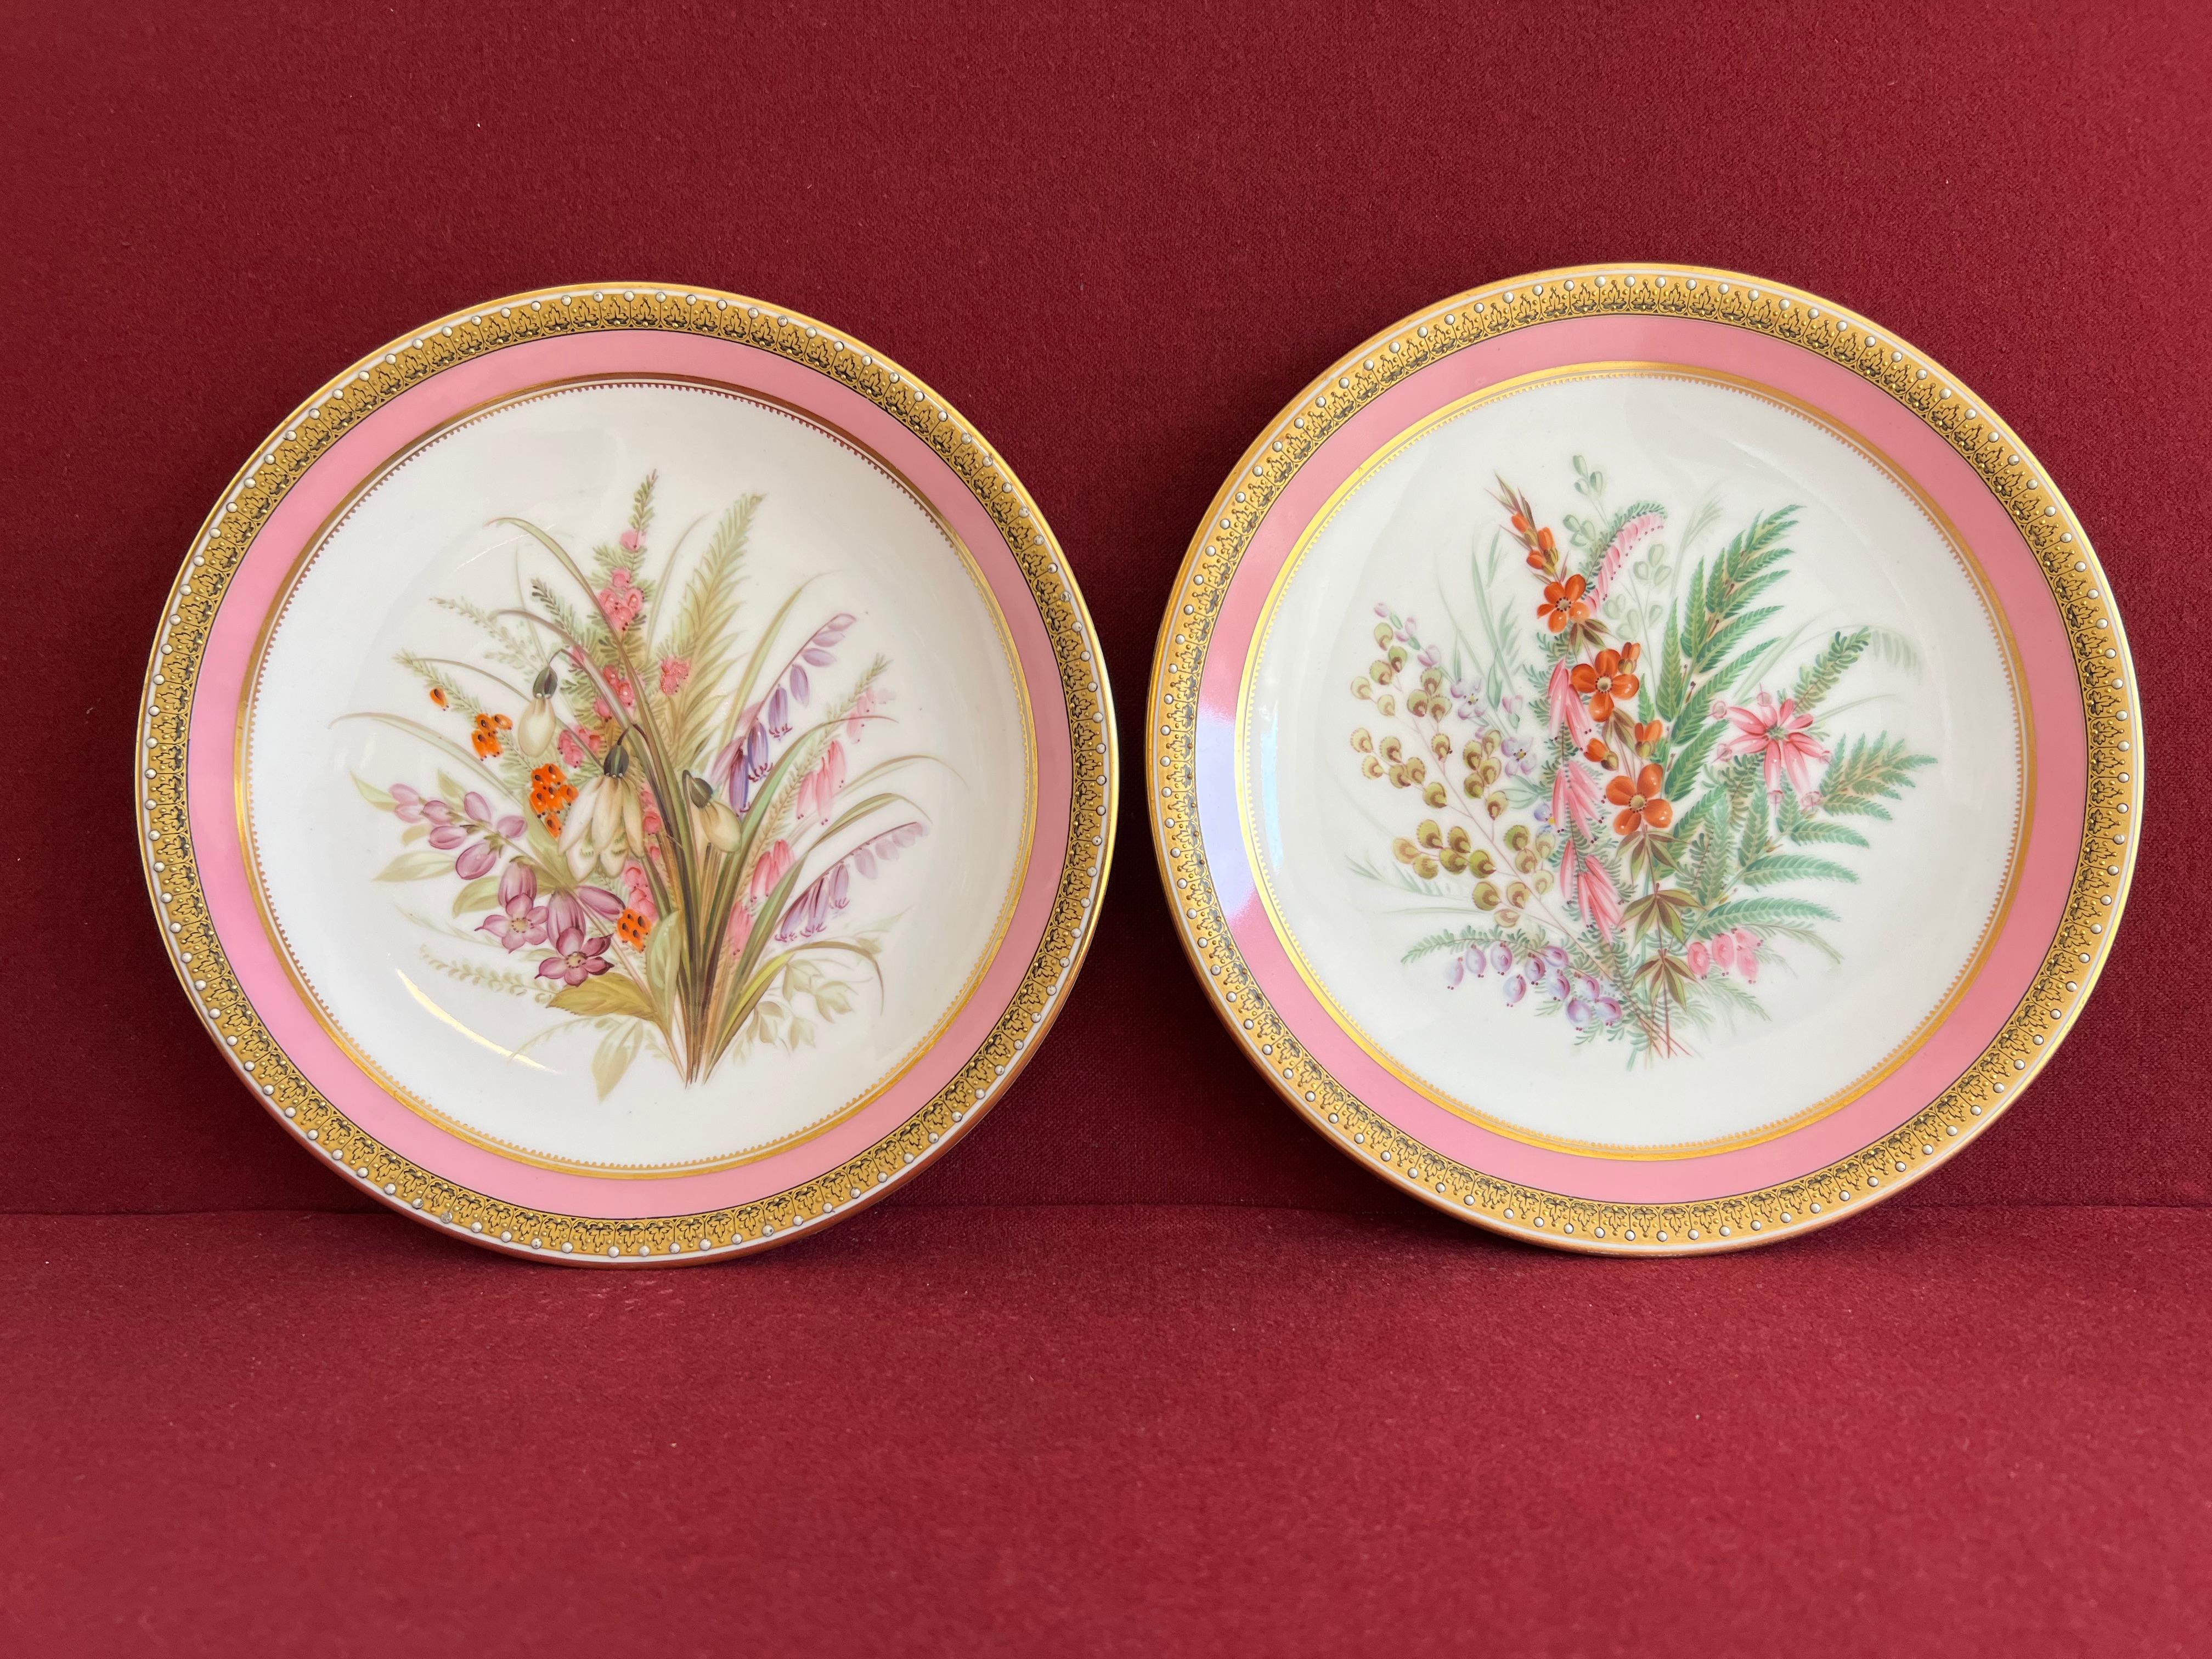 A pair of Royal Worcester Porcelain botanical dessert plates c.1862-1870. Beautifully hand painted with a floral pattern of various Heathers & Ferns. The plate has a round plain edge with a border pattern consisting of a gold and pink band with